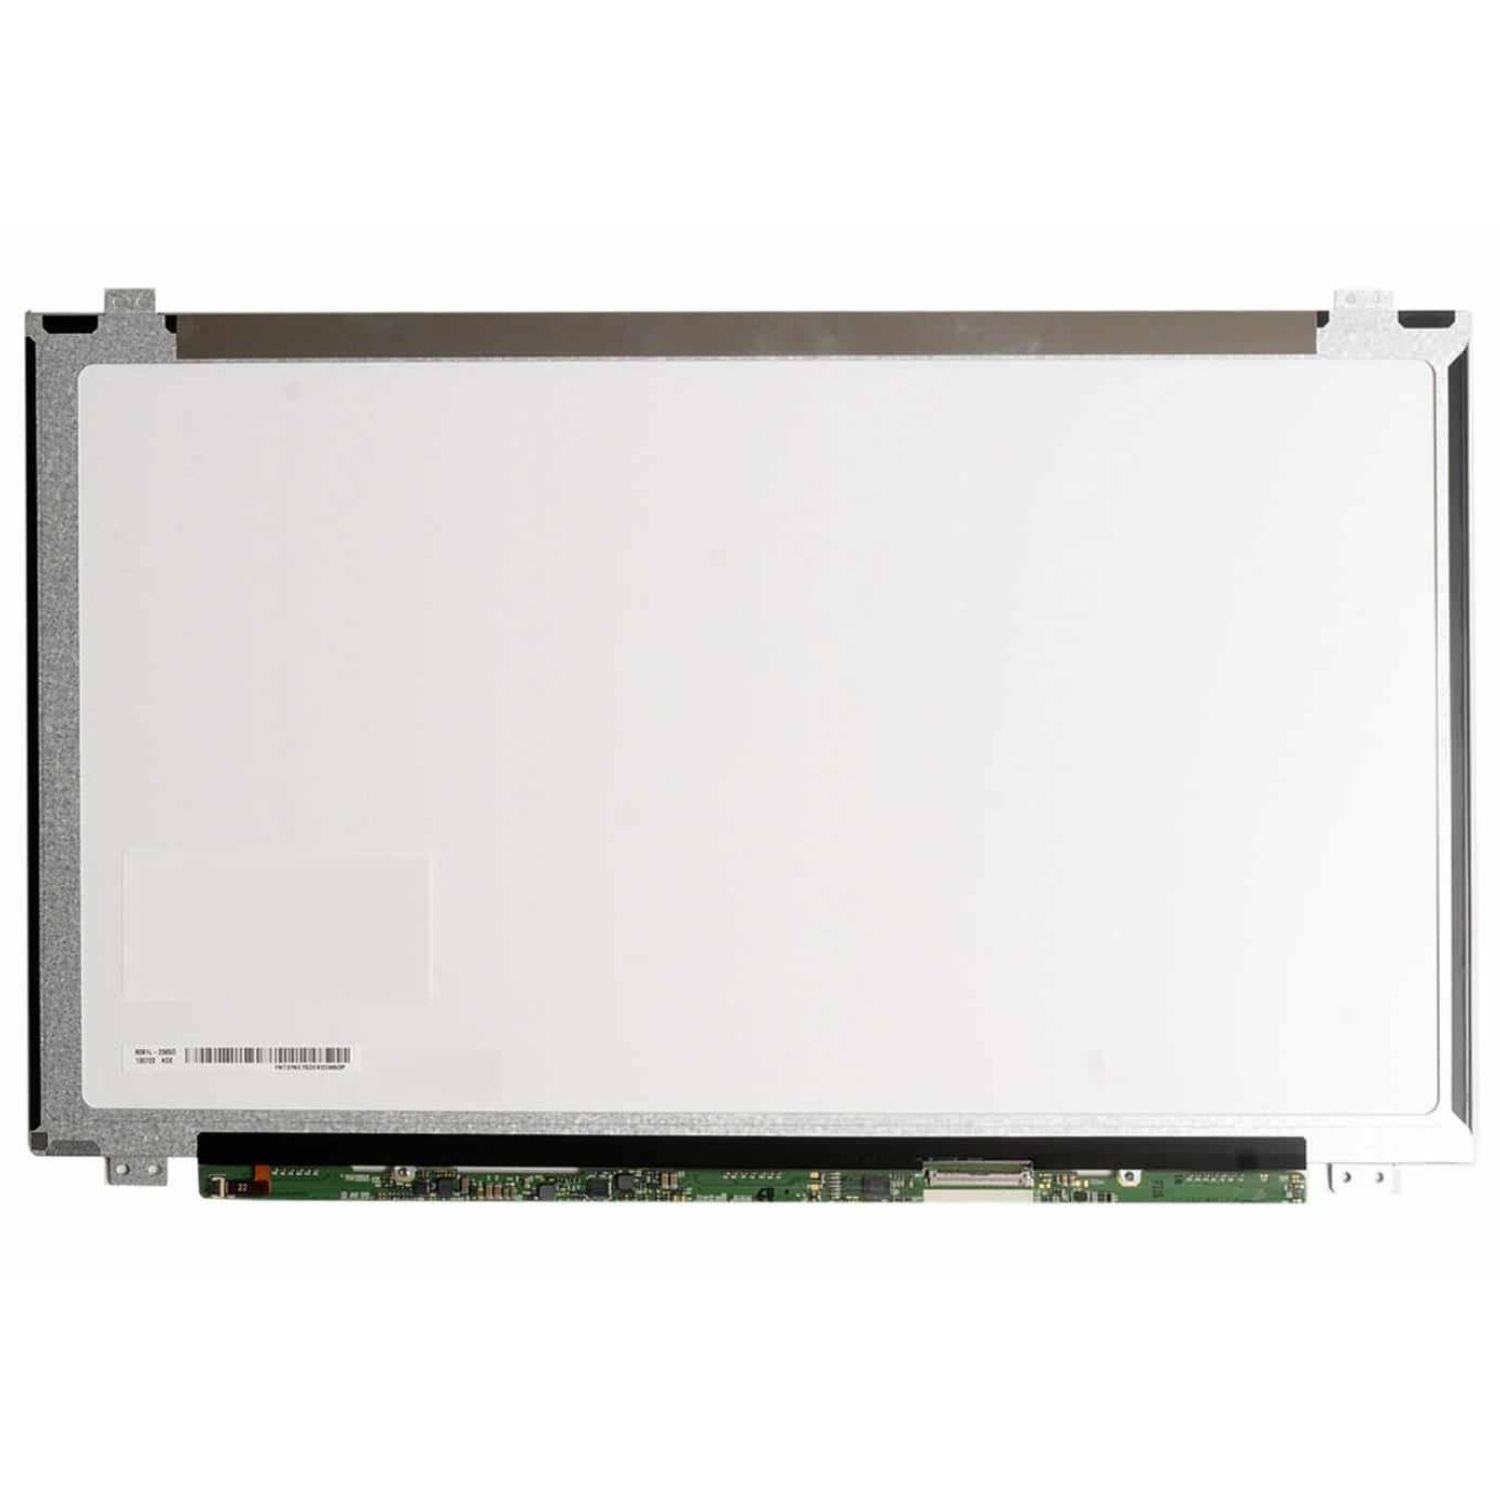 15.6 40 pin Full HD (FHD) slim paper screen for Hp Dell Lenovo Acer Sony Asus Series Laptops.